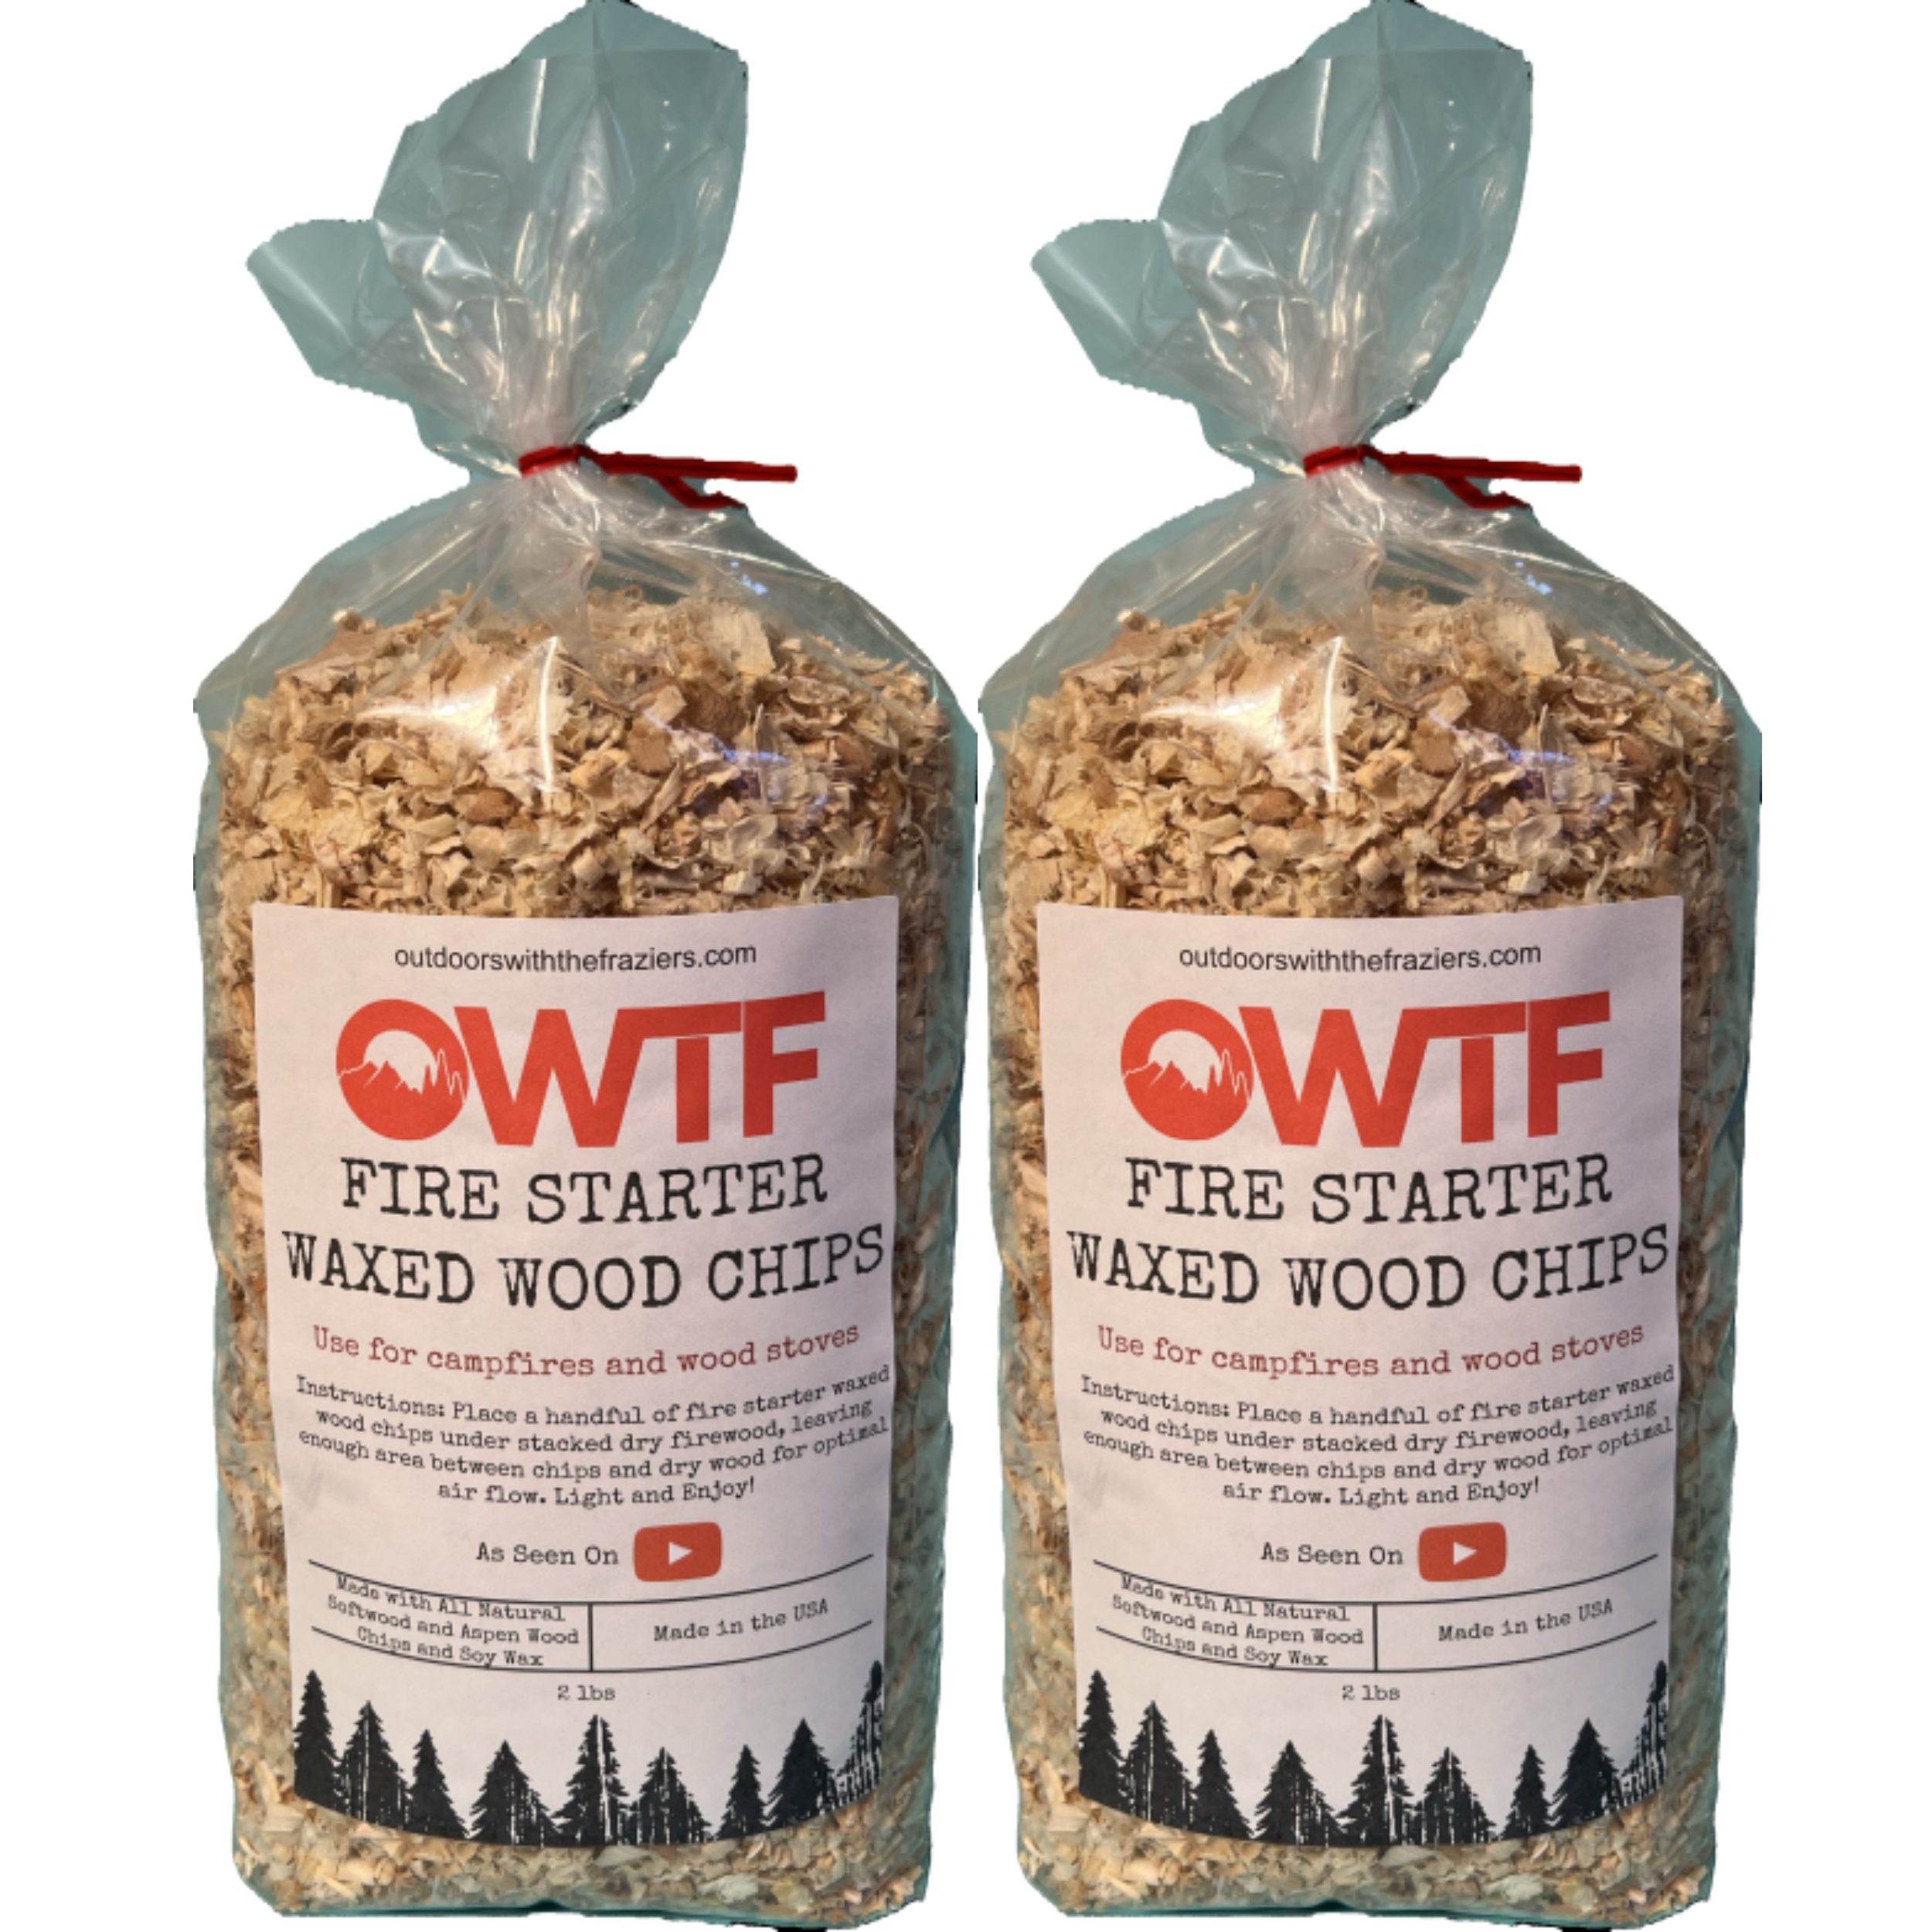 OWTF Fire Starter Waxed Pine Wood Chips 2lbs